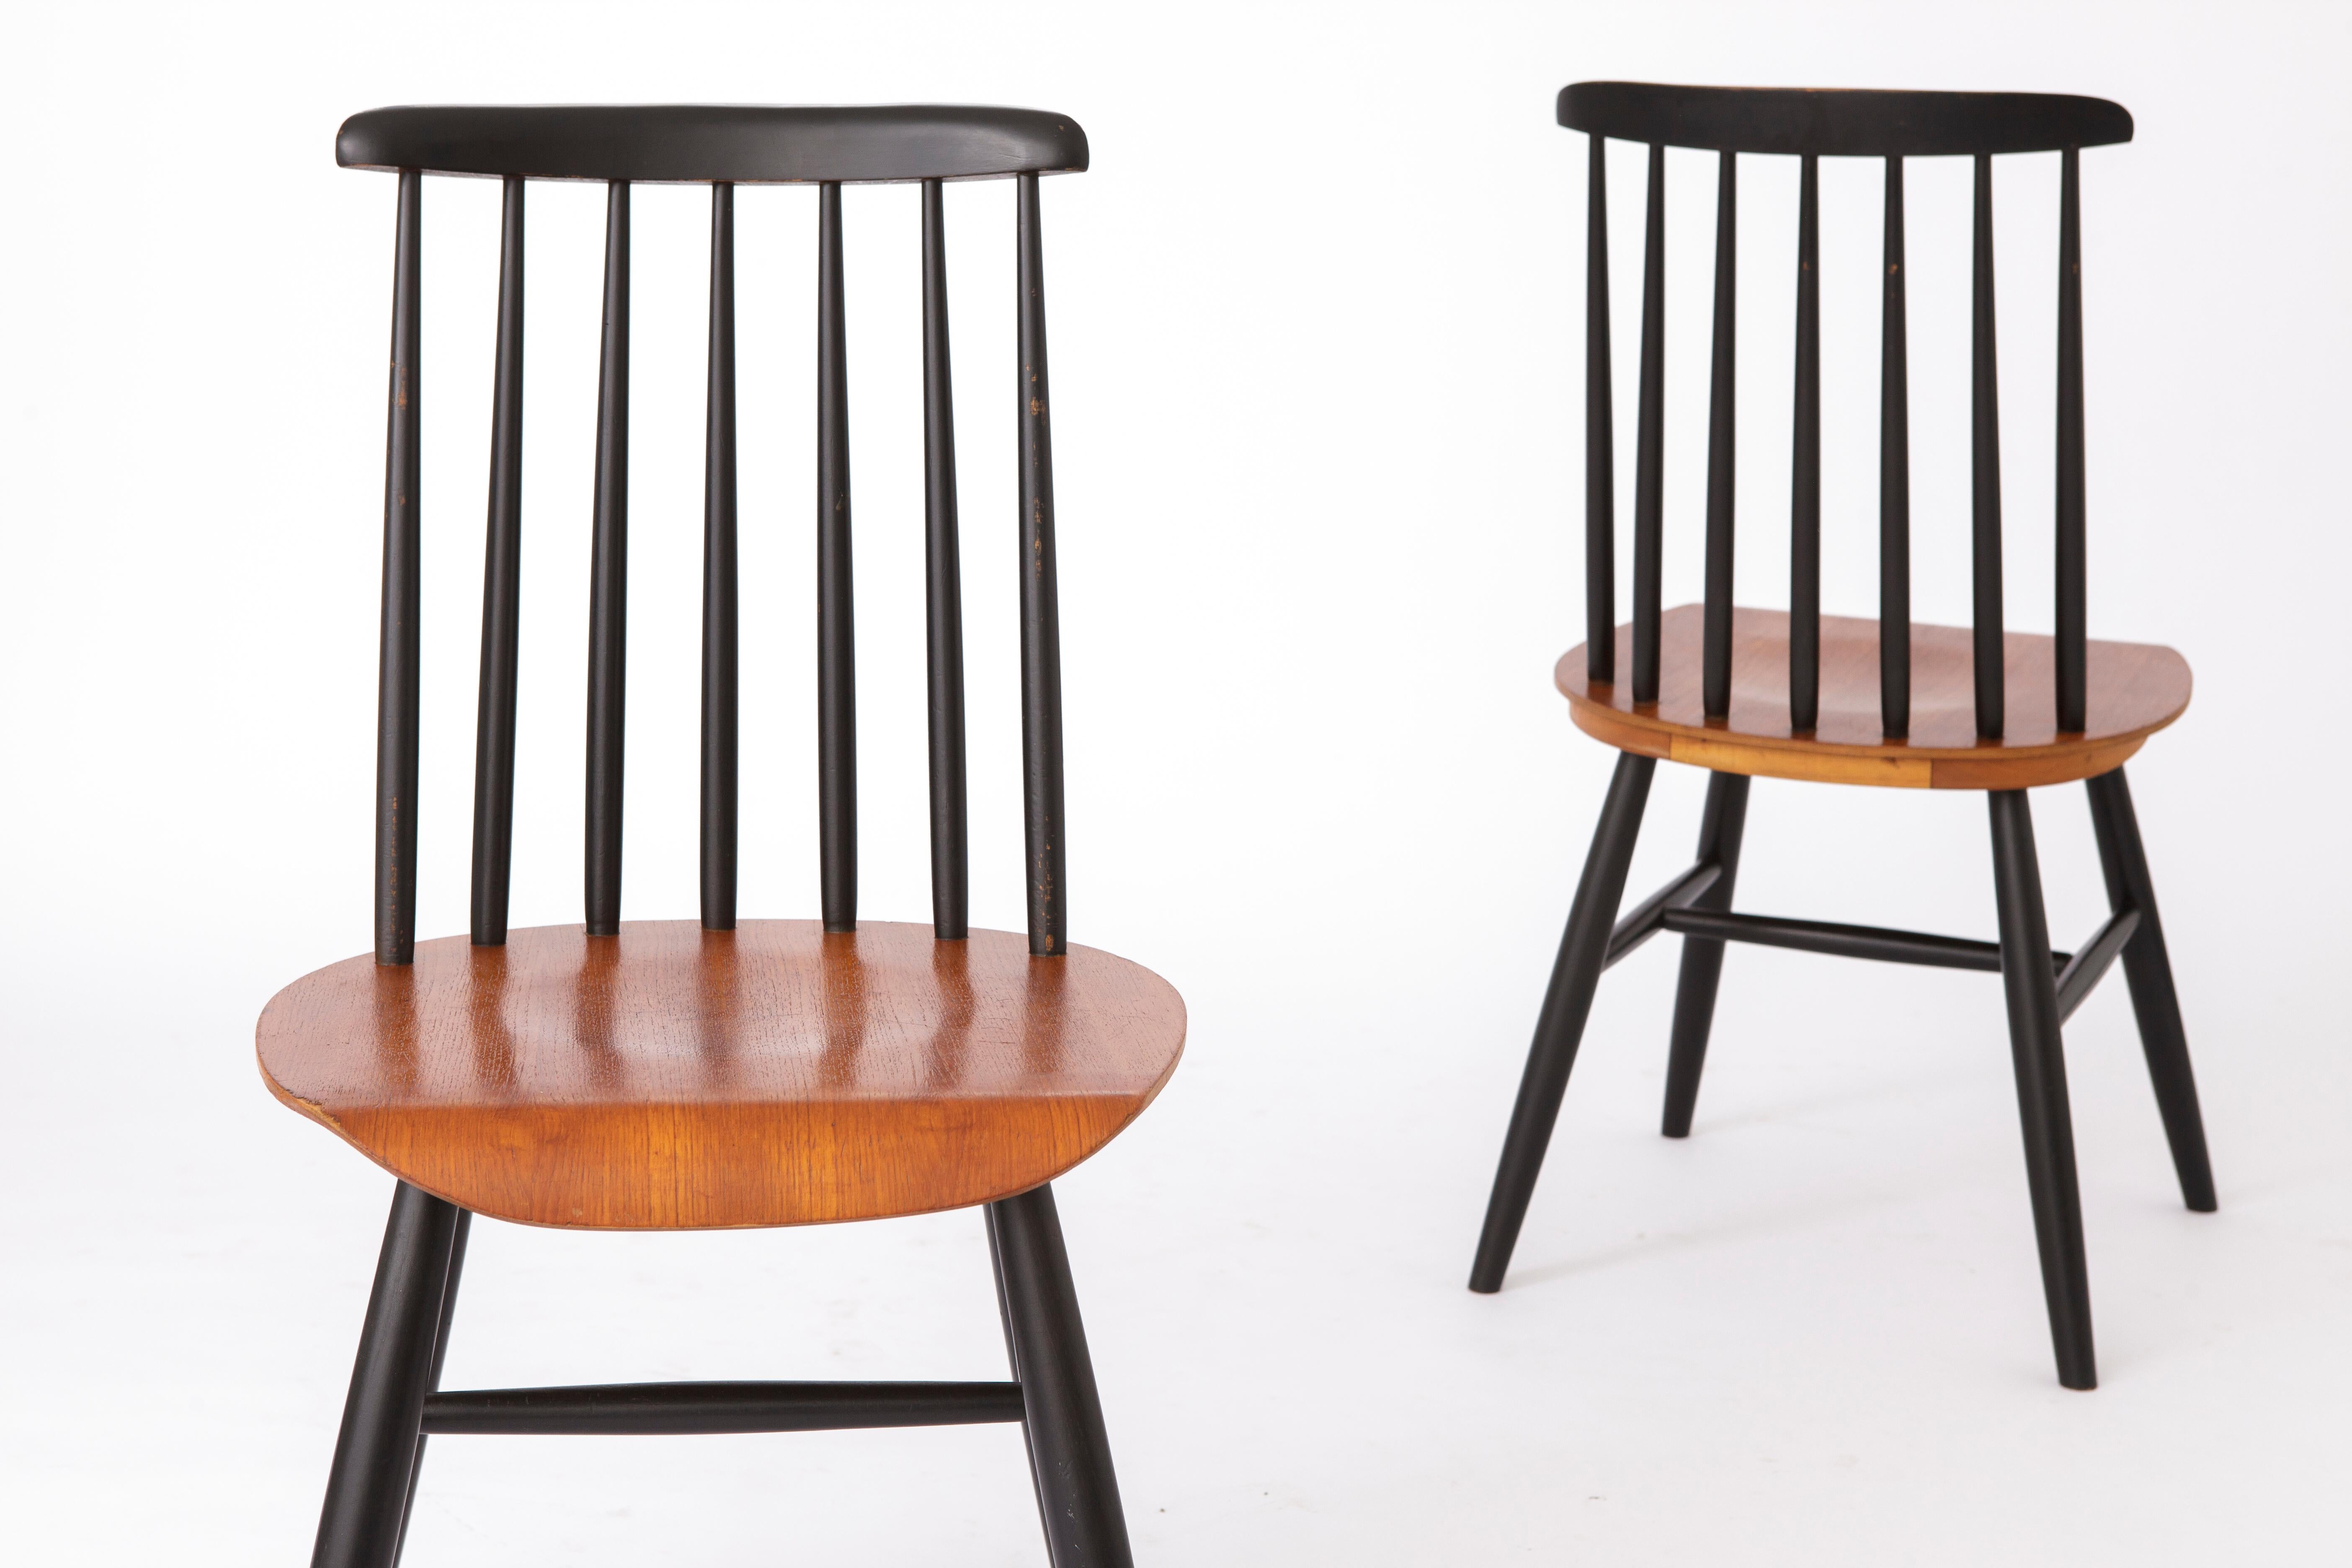 European 2 Vintage Spindle Back Chairs 1960s-1970s - Sweden For Sale